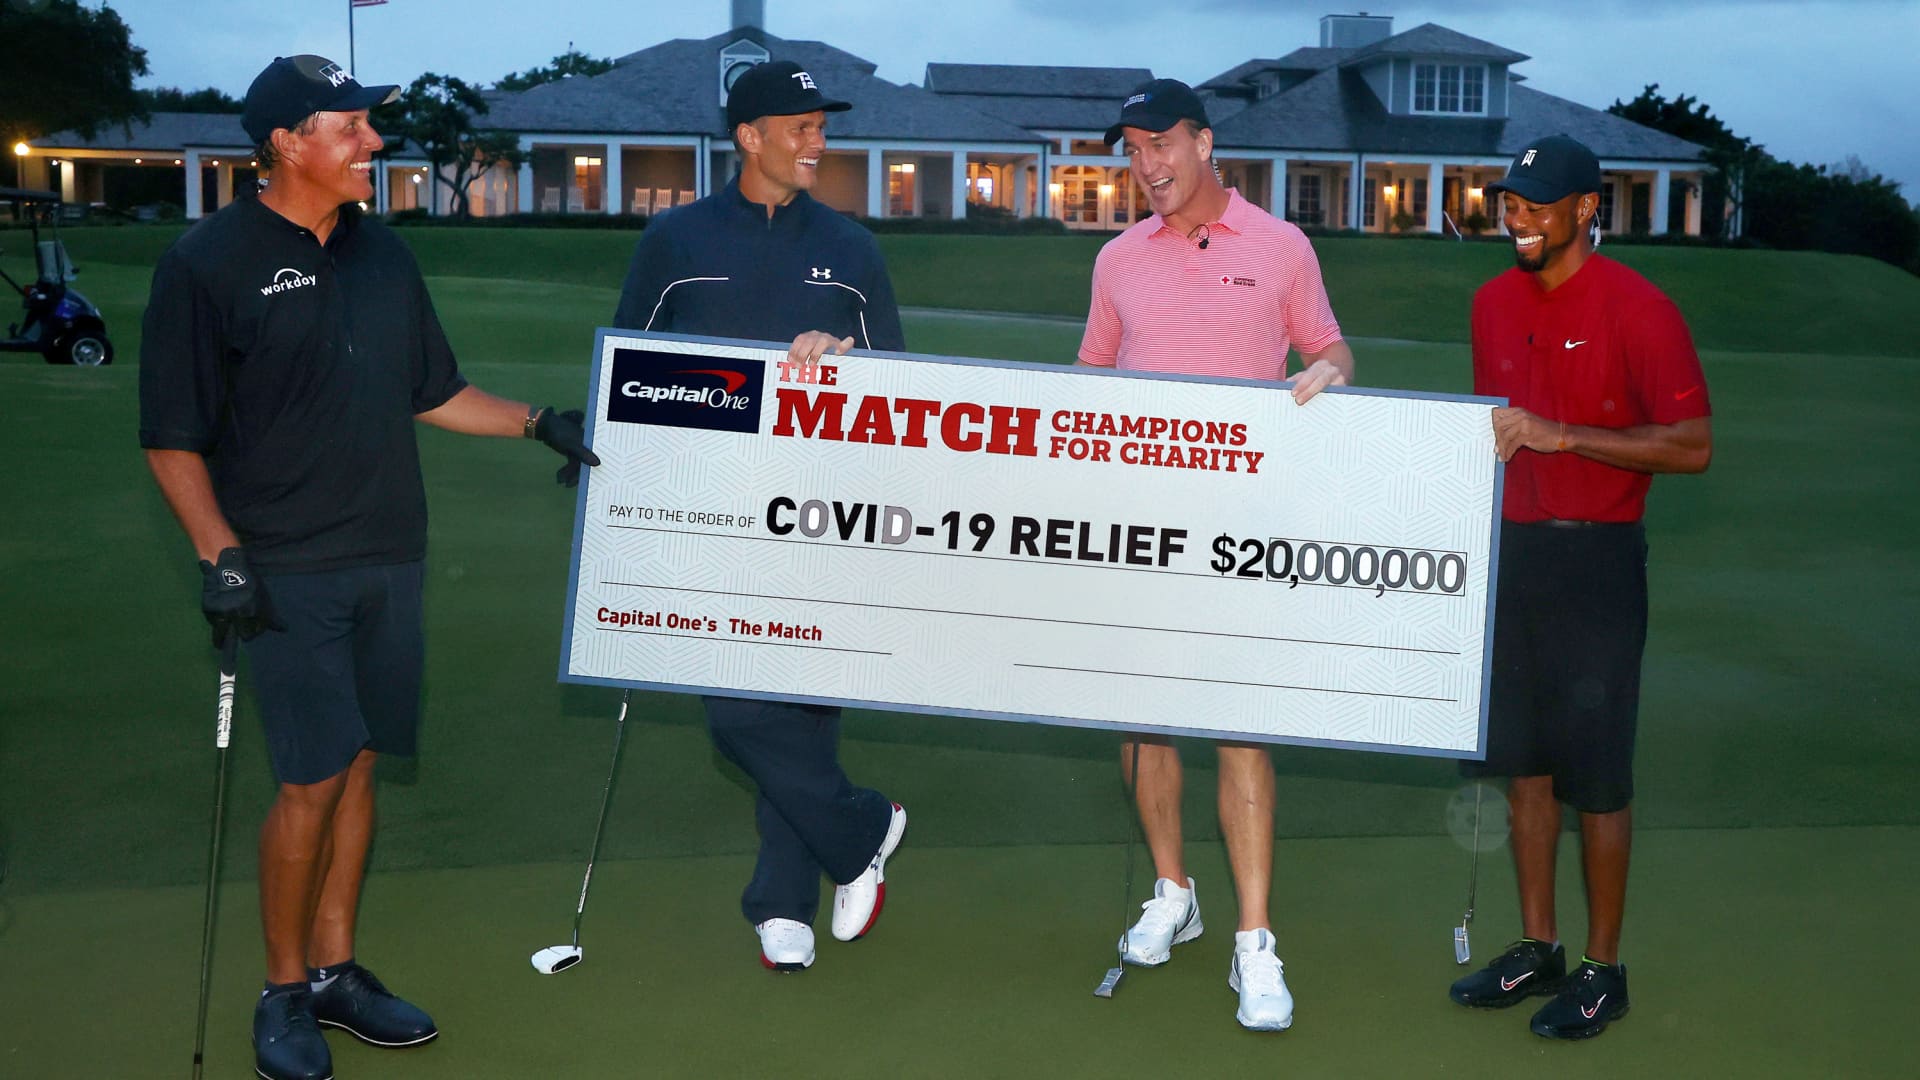 Tiger Woods and former NFL player Peyton Manning celebrate defeating Phil Mickelson and NFL player Tom Brady of the Tampa Bay Buccaneers on the 18th green during The Match: Champions For Charity at Medalist Golf Club on May 24, 2020 in Hobe Sound, Florida.